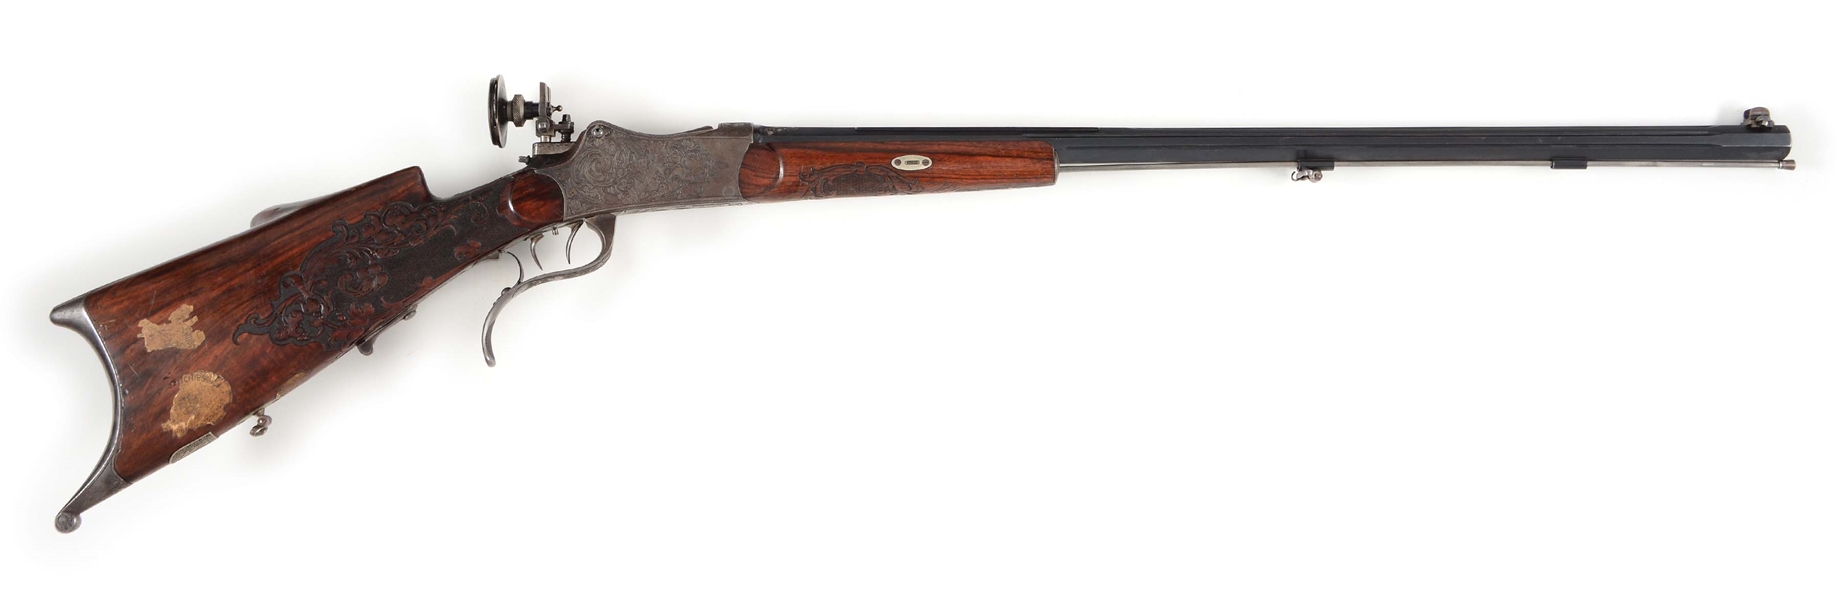 (C) A FINE AYDT SYSTEM GERMAN SCHUTZEN RIFLE WITH DEEPLY ENGRAVED ACTION, SILVER DECORATION ON BARREL, AND BEAUTIFULLY CARVED SCHUETZEN STOCK.